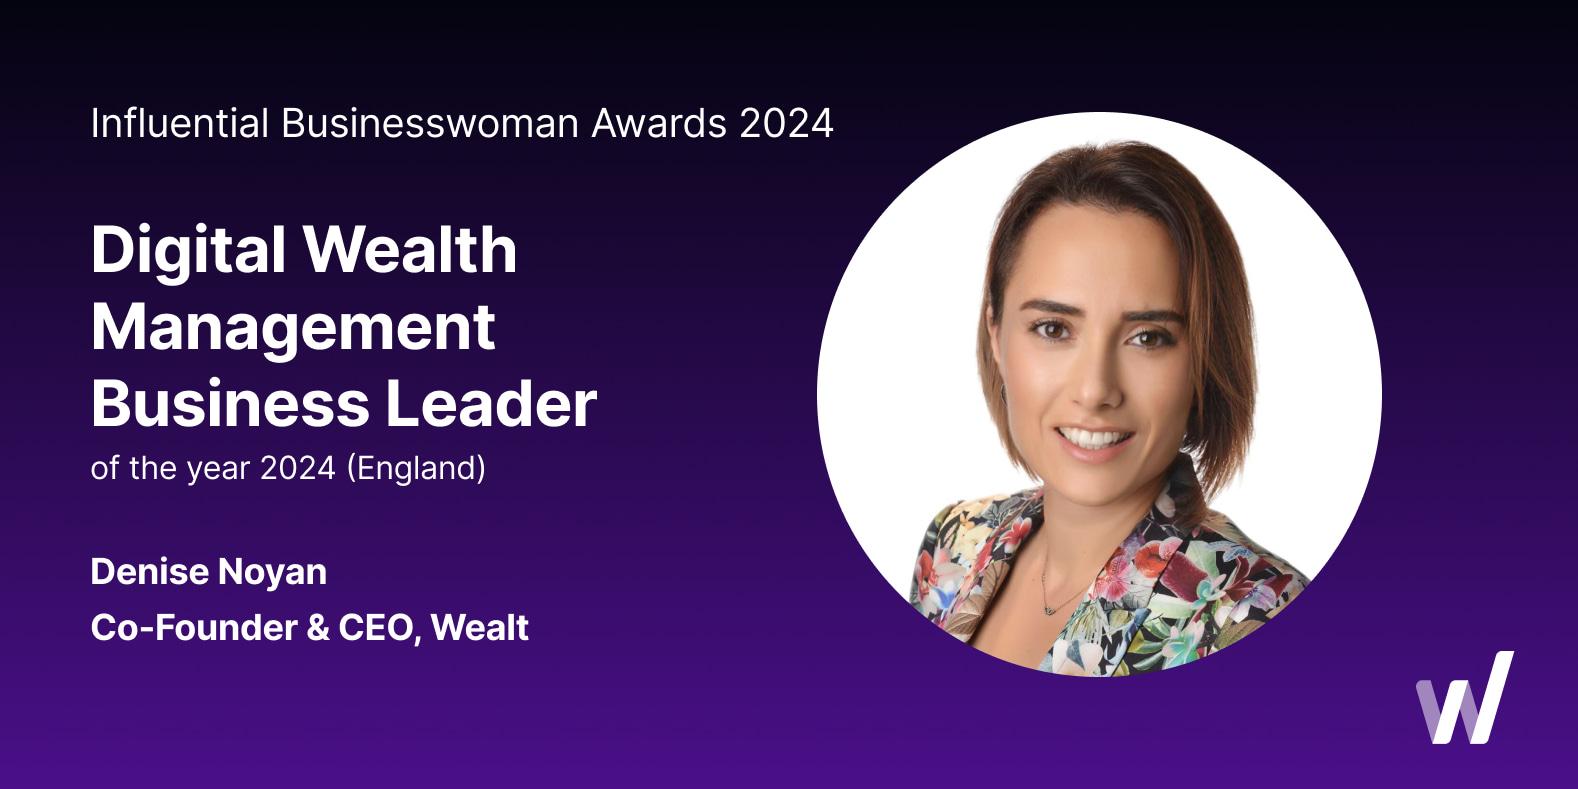 Denise Noyan of Wealt has been awarded the Digital Wealth Management Business Leader of the Year 2024 at the Influential Businesswoman Awards.